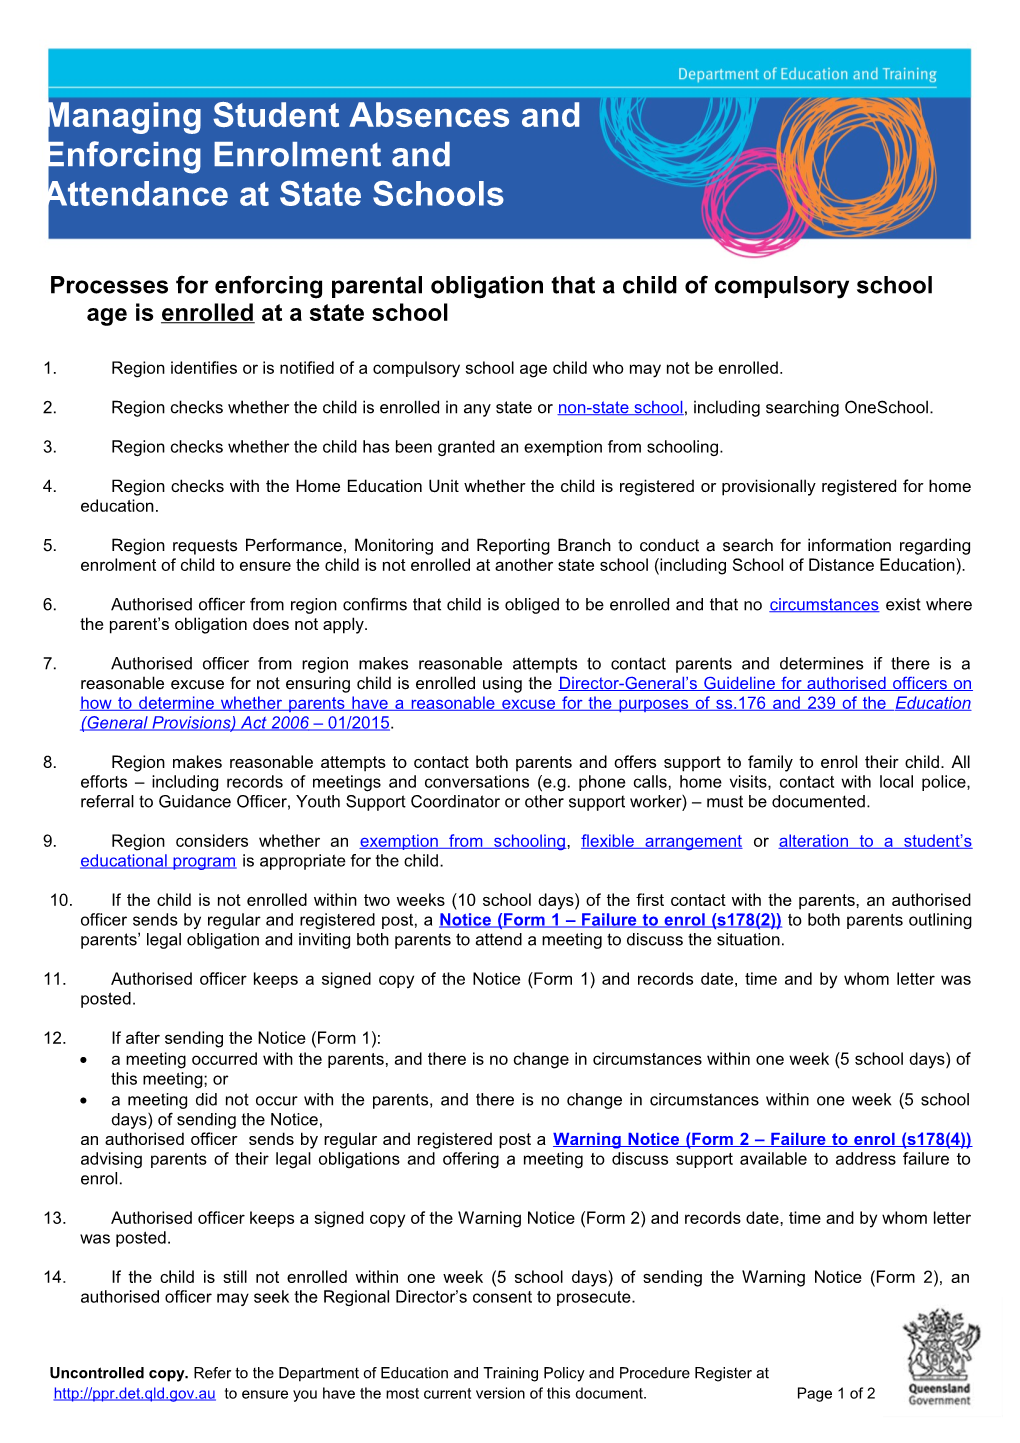 Processes for Enforcing Parental Obligation That a Child of Compulsory School Age Is Enrolled